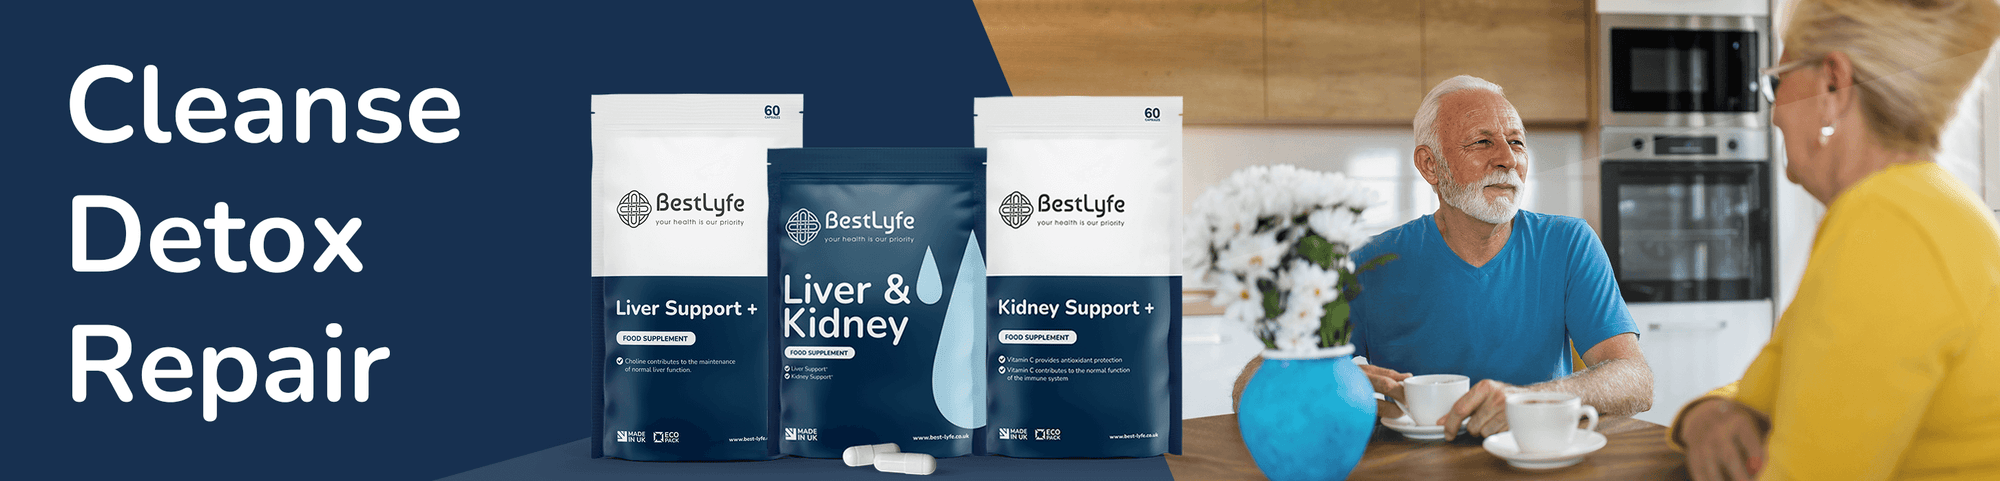 Cleanse, Detox, Repair With Liver and Kidney Supplements